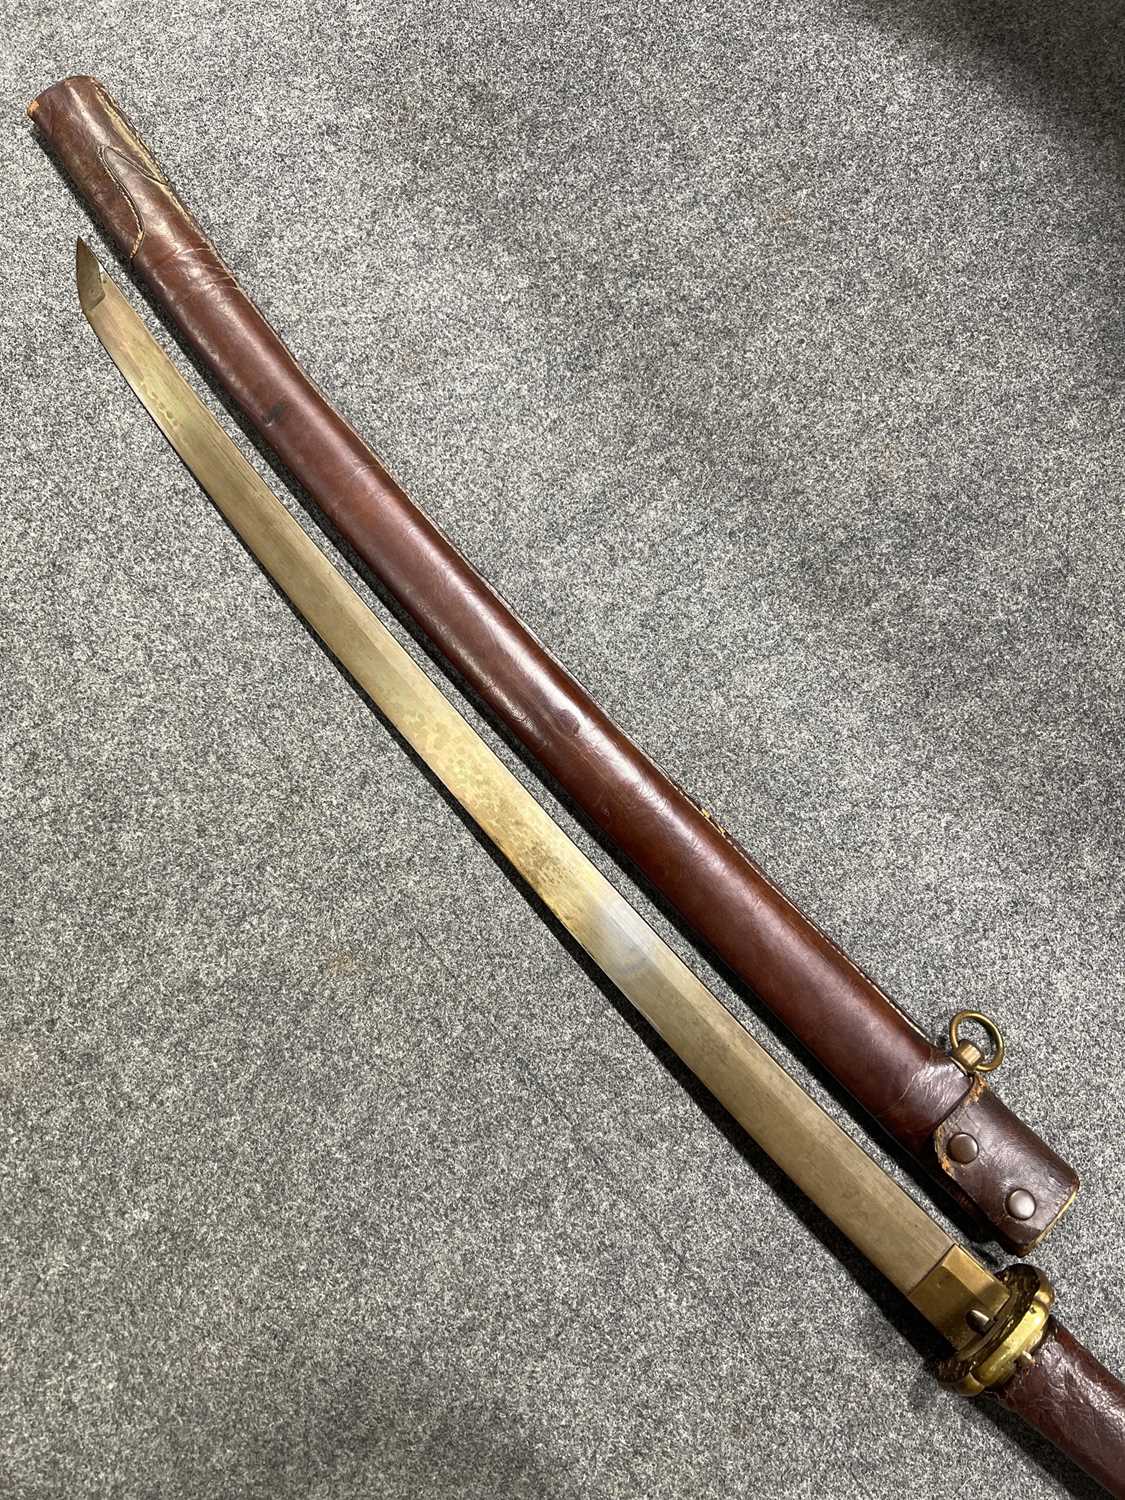 Japanese sword, WWII, - Image 2 of 10